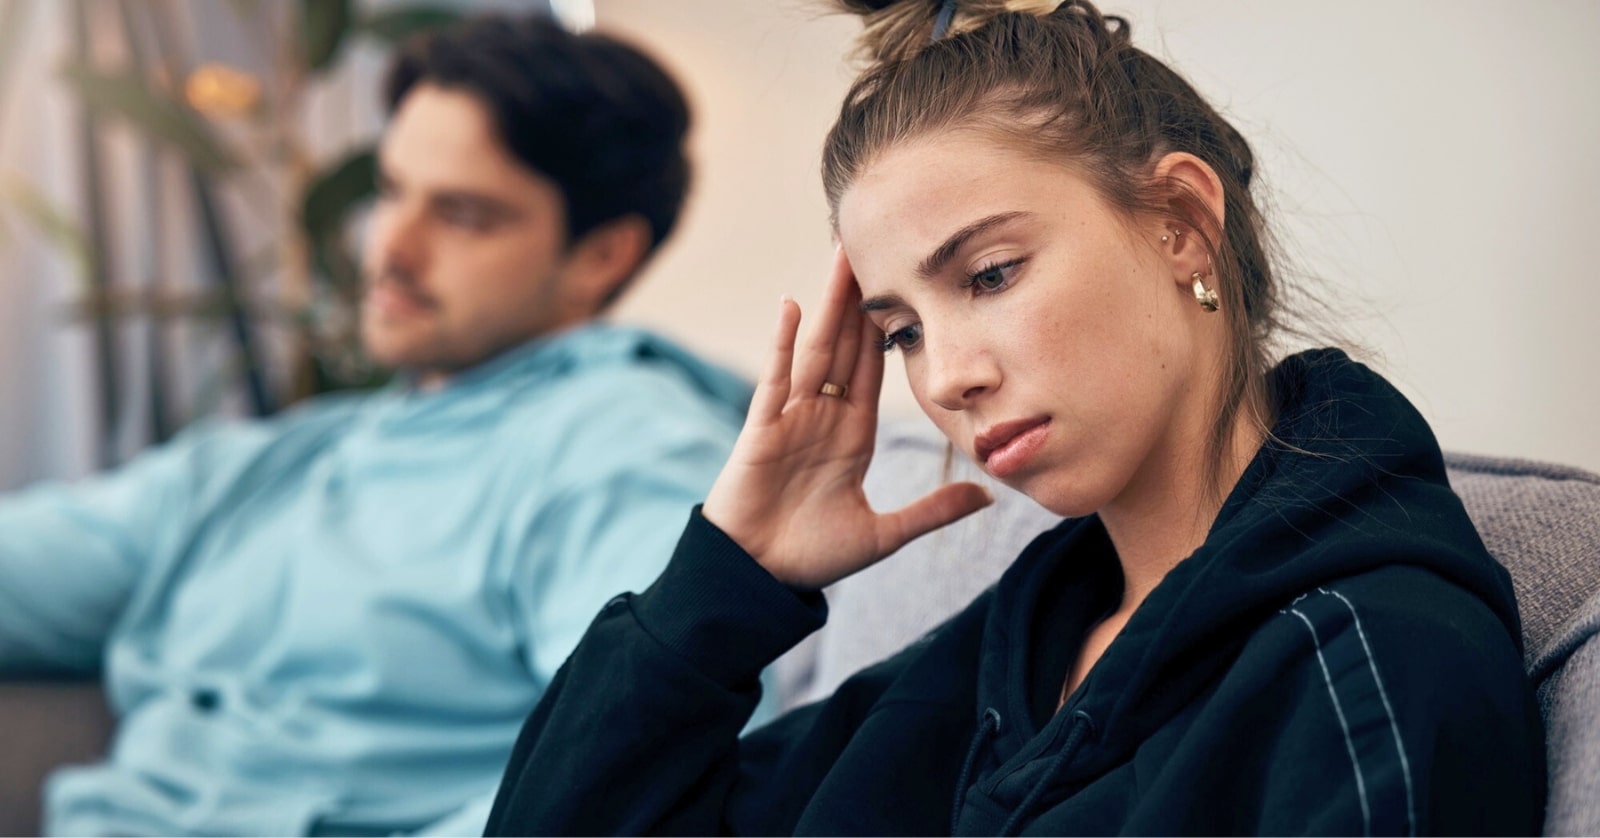 woman sitting on the couch with her boyfriend nearby, she leans her head on her hand as if to question whether she is happy in the relationship